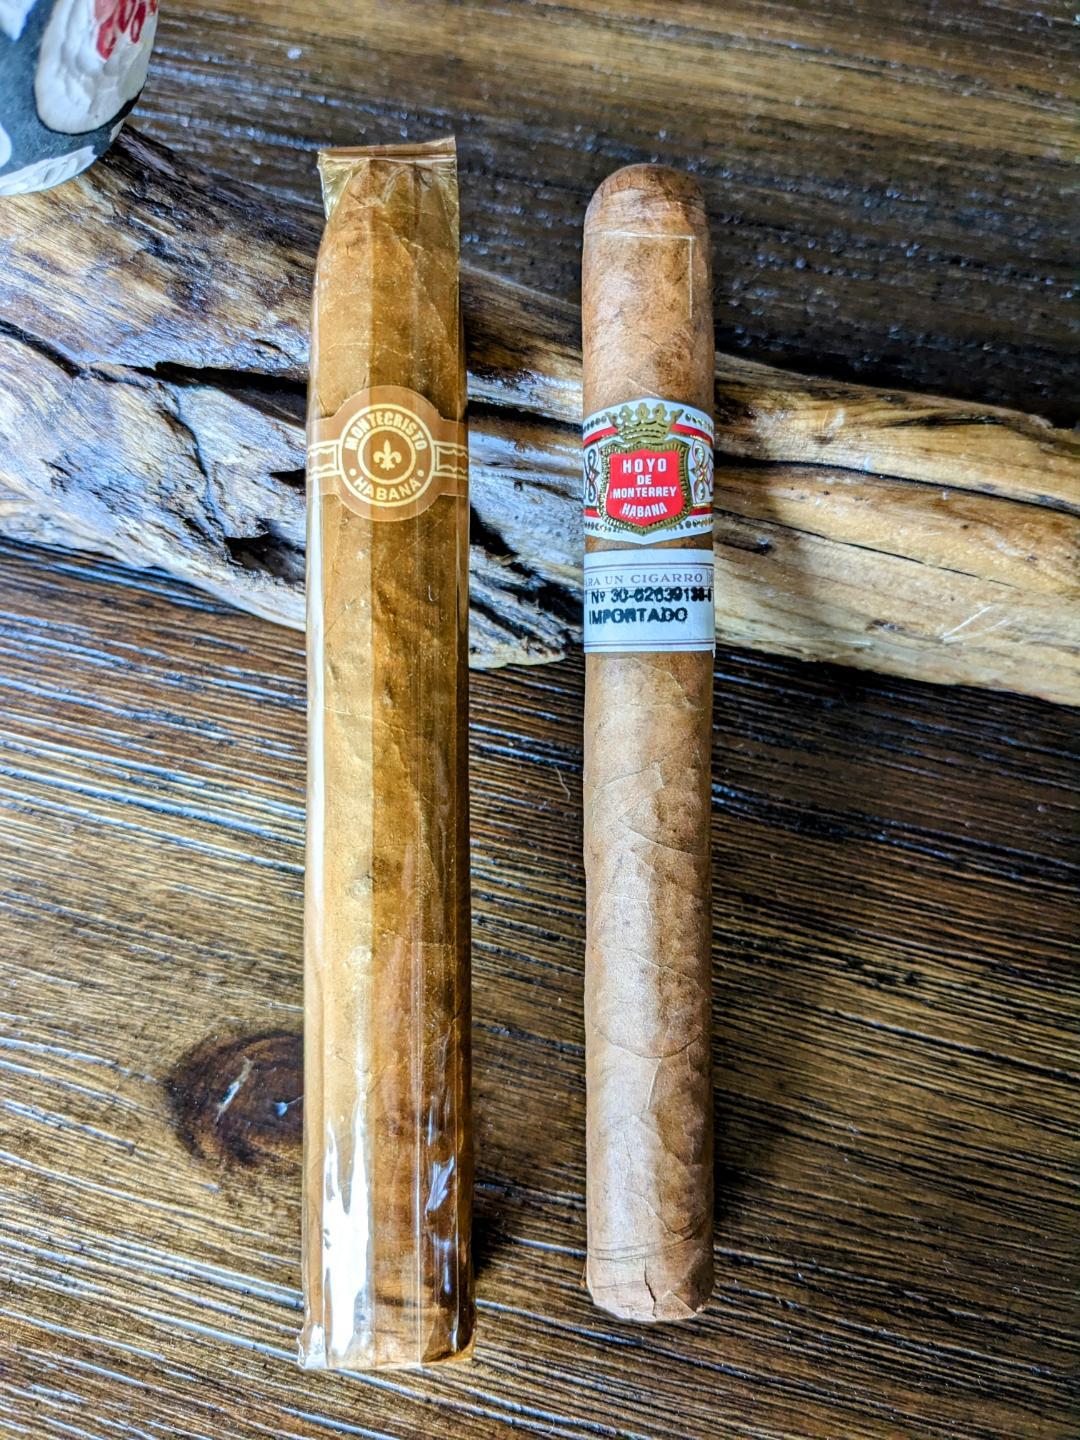 Weekend Comp: Let's play a game of Cuban Cigar Fake Snap - Cigars  Discussion Forum the water hole - Friends of el Habano Cuban Cigars  Discussion Forum - FOH Forum